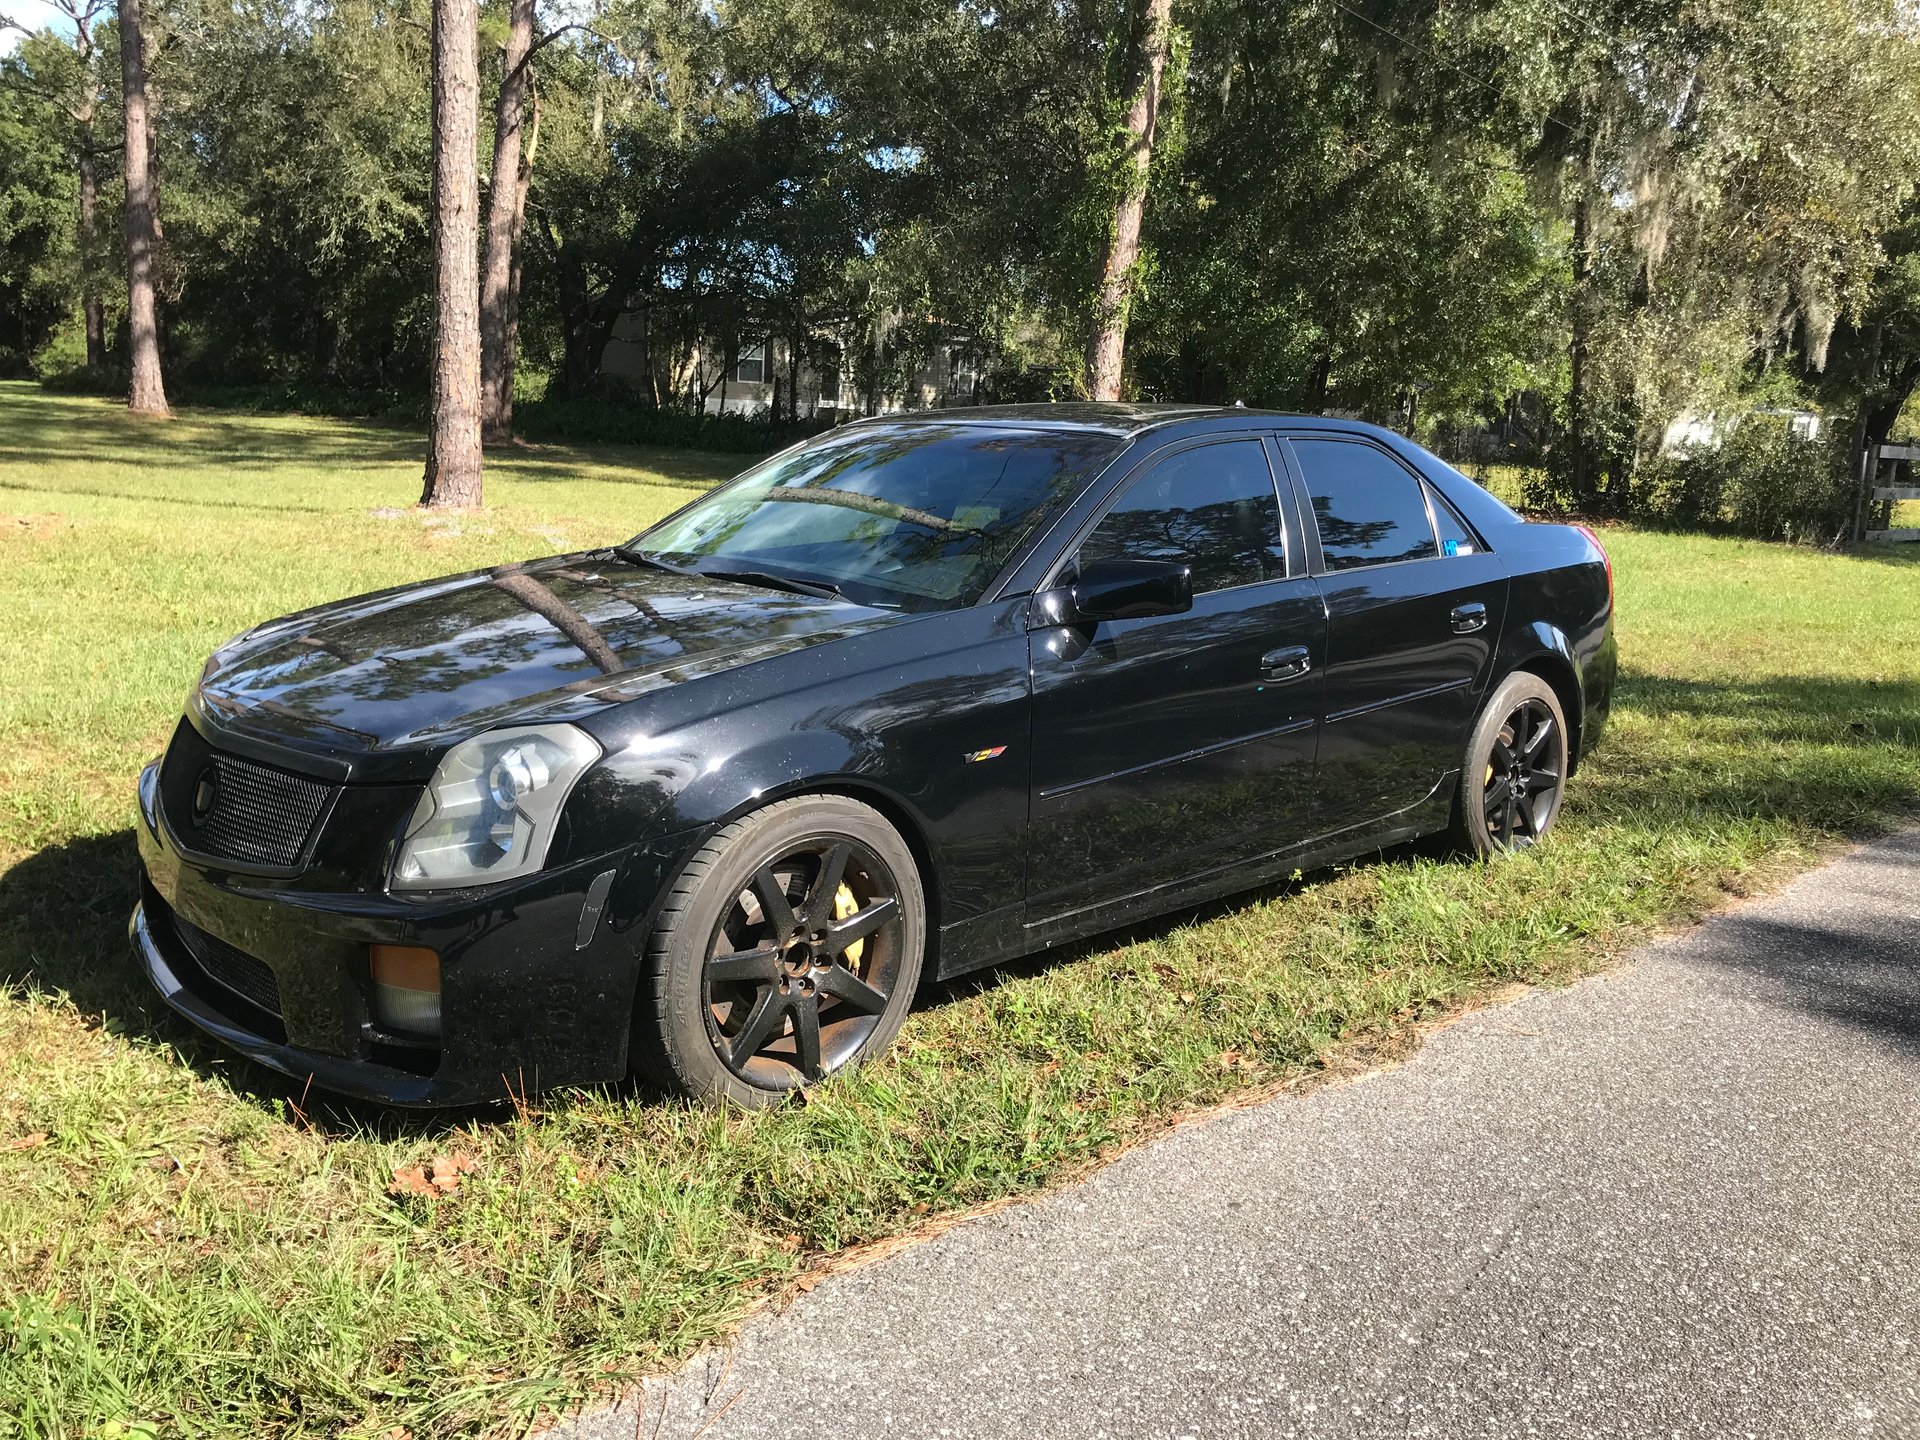 El Choppo - 2004 CTS-V revival and build thread - LS1TECH - Camaro and  Firebird Forum Discussion